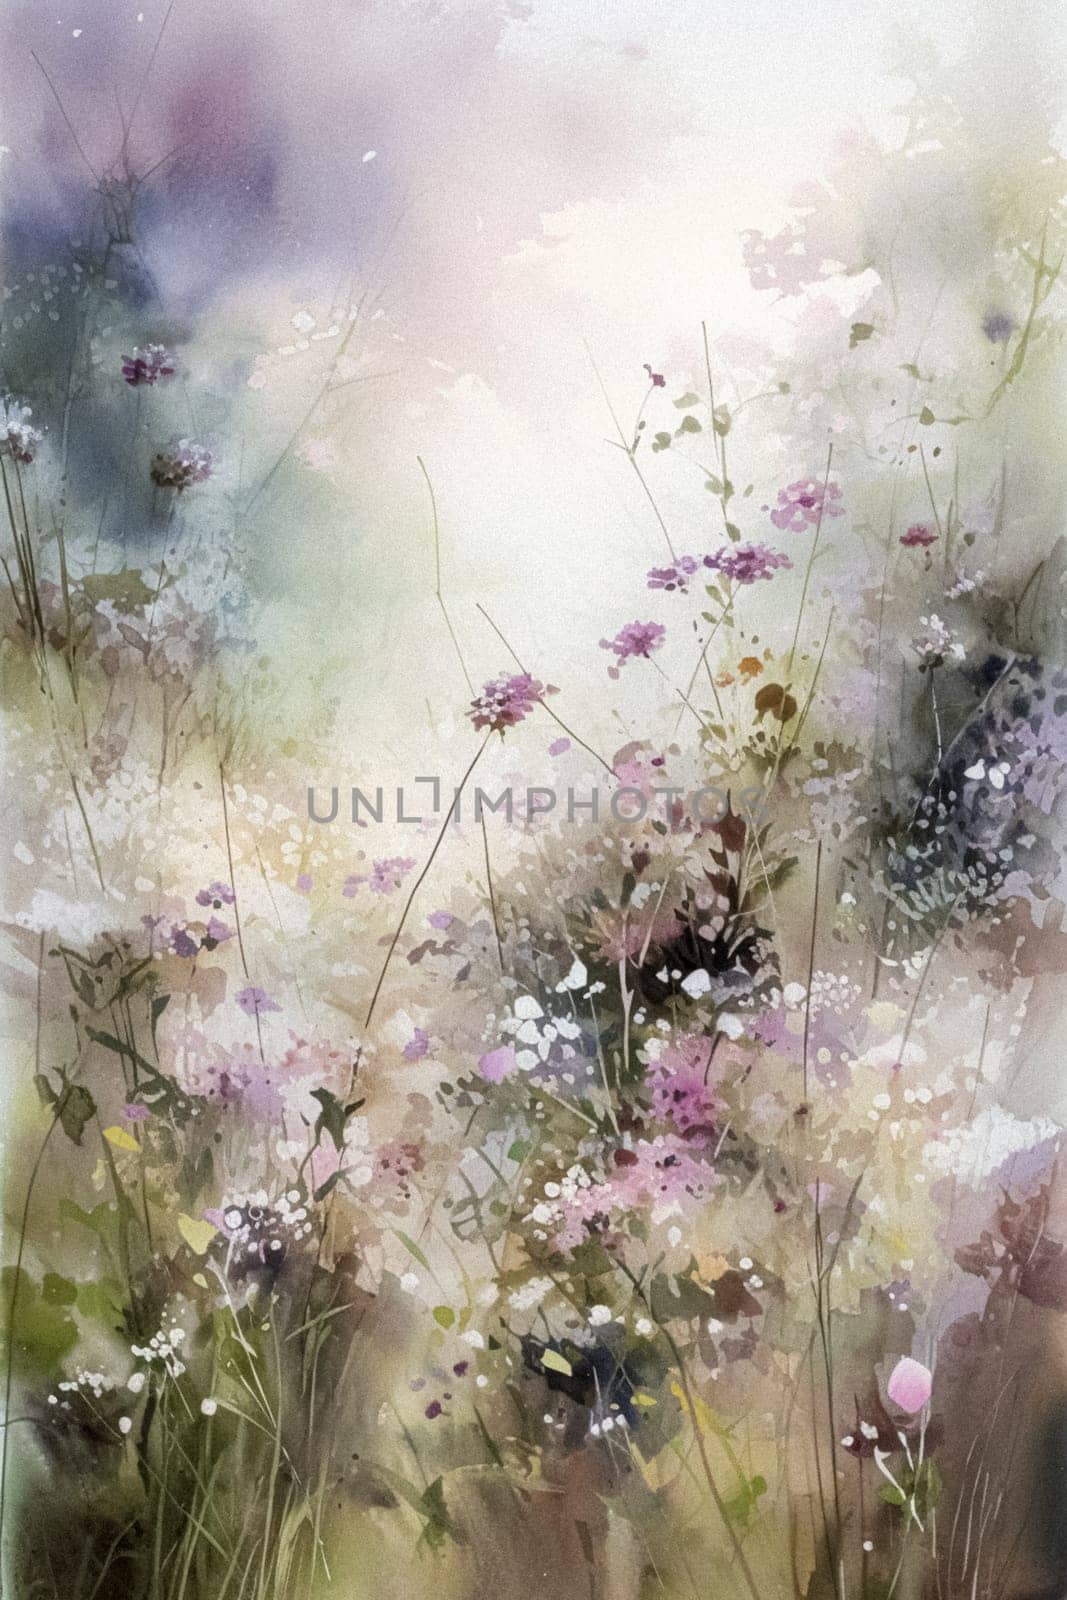 Oil fine art, romantic flowers in soft pastel colours, evoking a sense of tranquility and natural floral beauty, printable art design idea